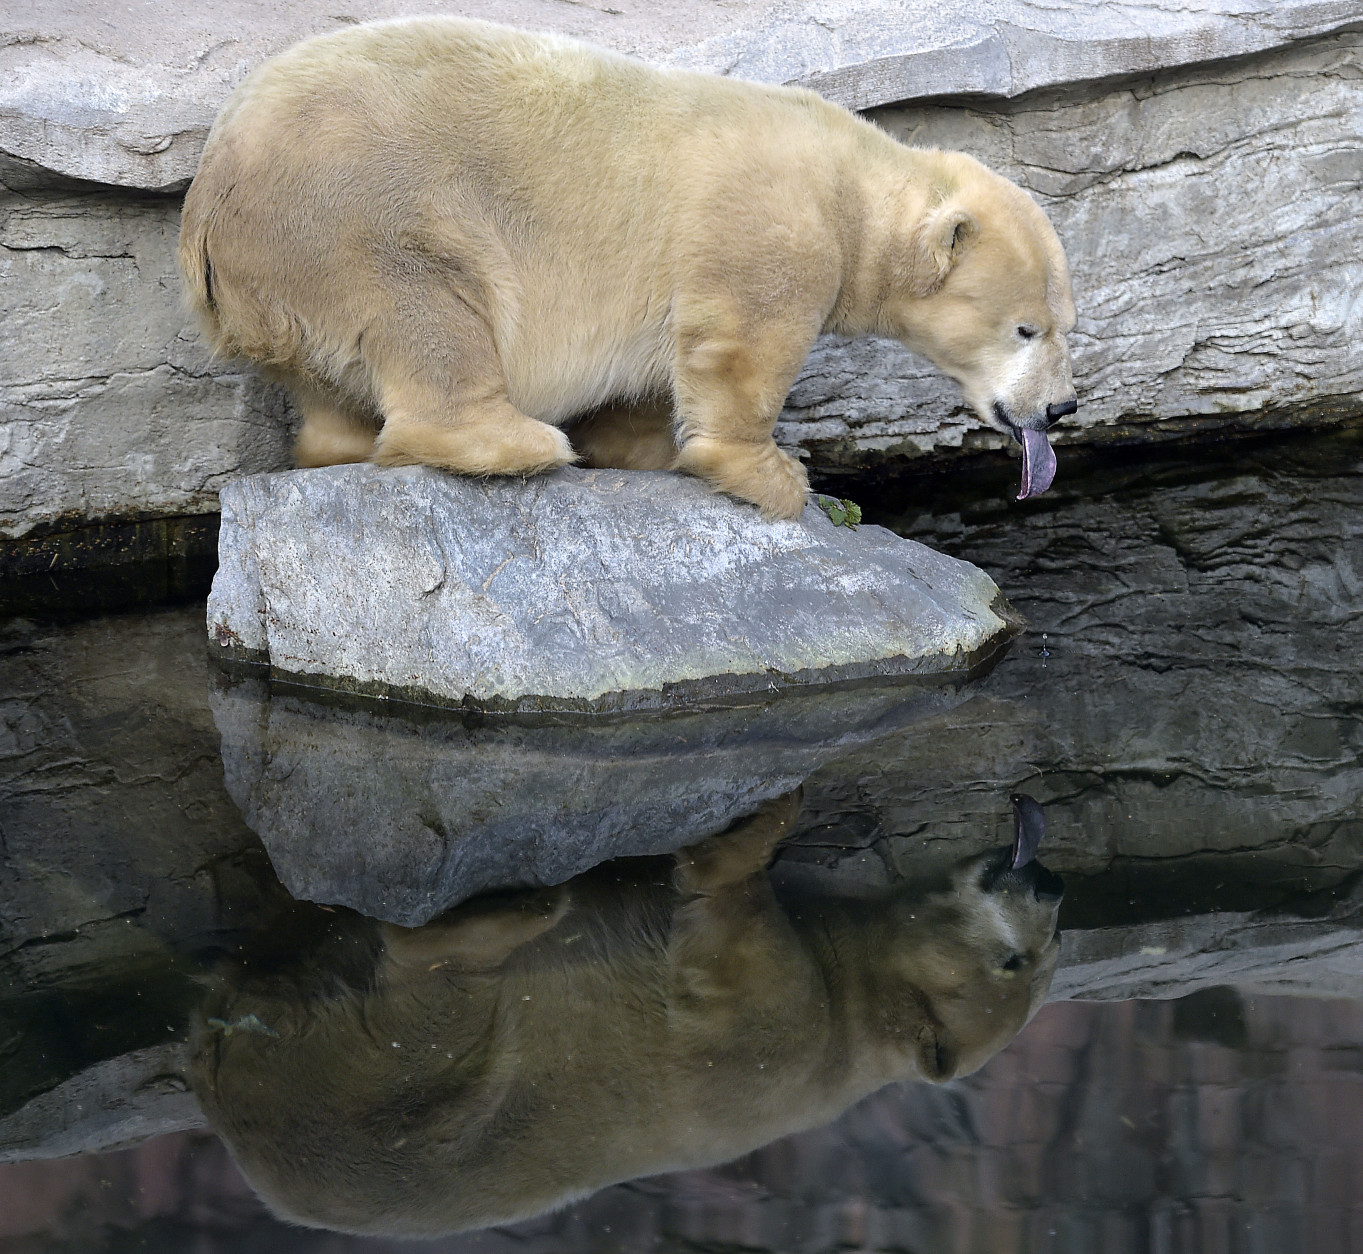 Little handicapped female polar bear Antonia shows a blue tongue t on a cold day at the zoo in Gelsenkirchen, Germany, Tuesday, Jan. 6, 2015. The oldest bear in the zoo is 25 years old, but due to s dwarfism, it  measures only 1.35 meter compared to 2.20 meter of her fellows. (AP Photo/Martin Meissner)